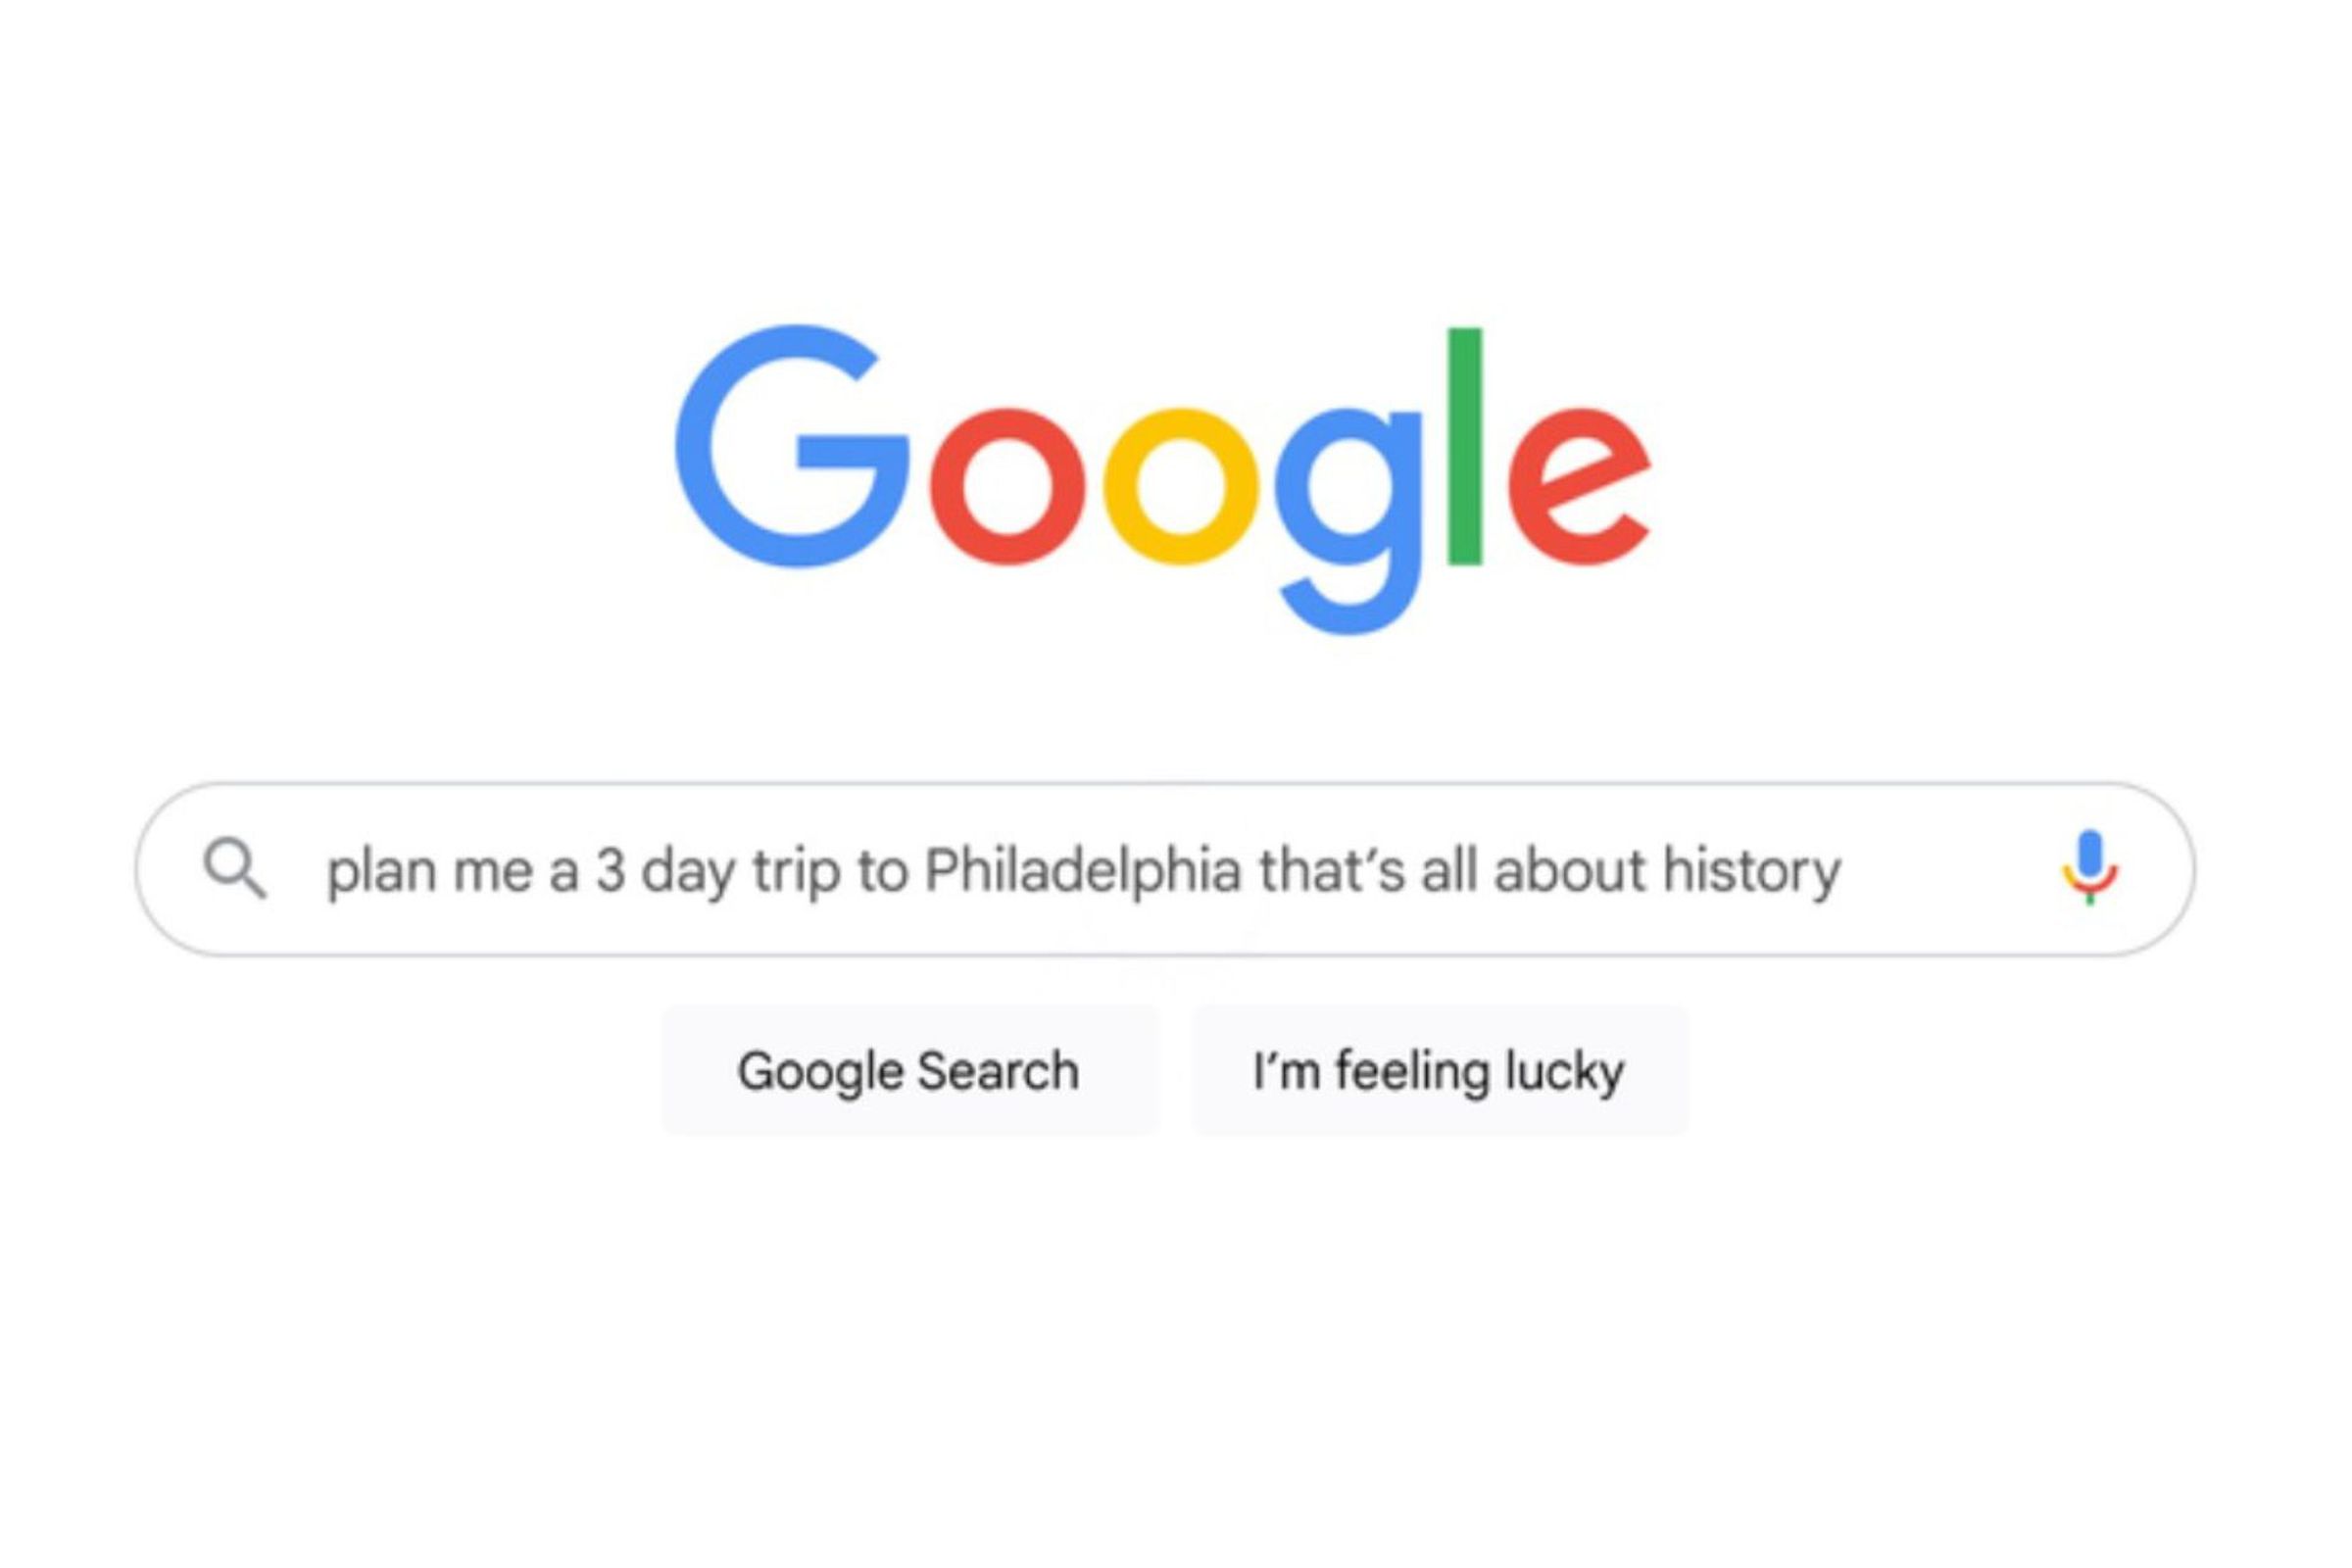 A screenshot of Google Search with the request “plan me a 3 day trip to Philadelphia that’s all about history”